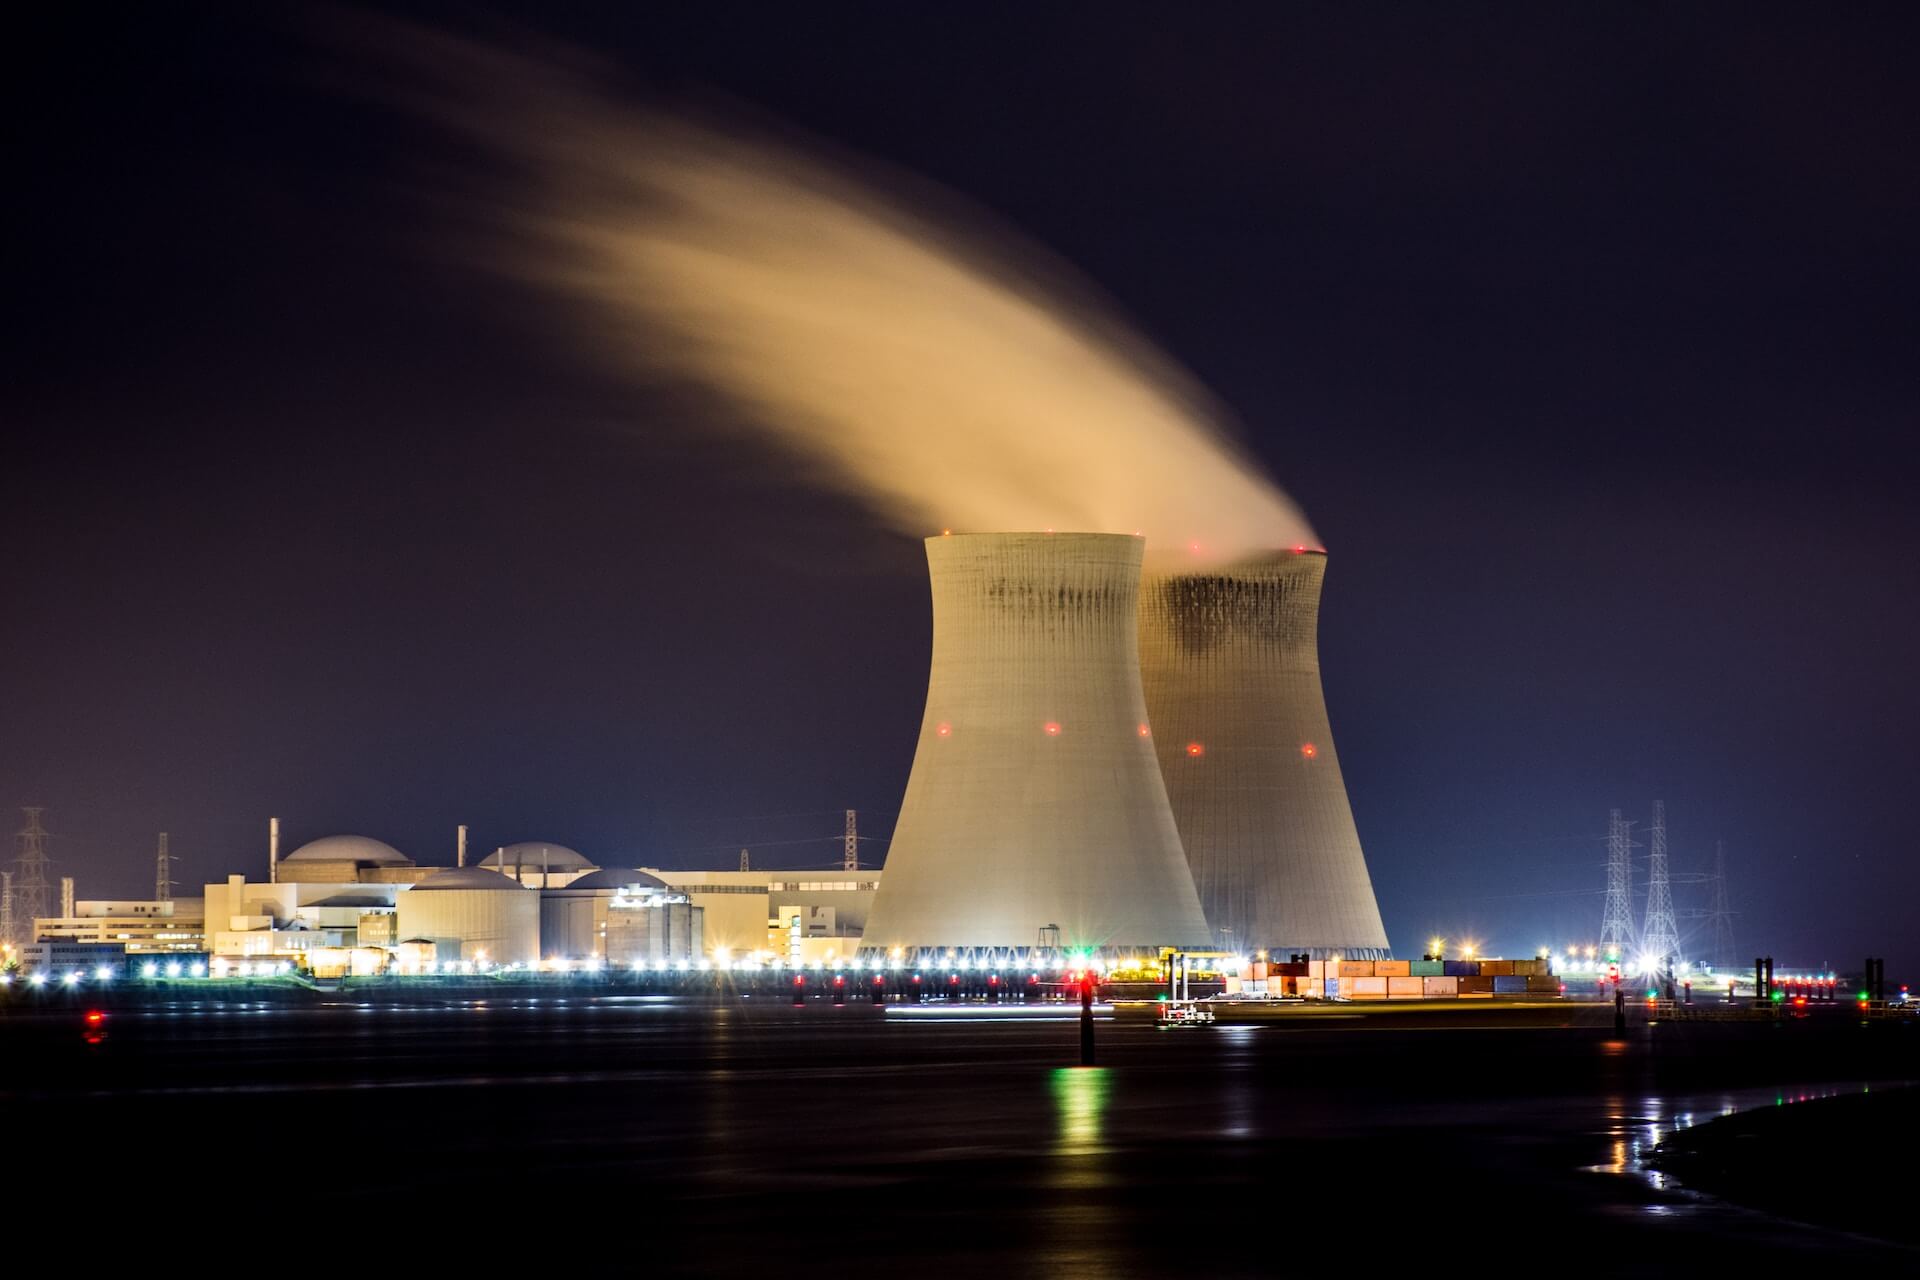 Nuclear power plant at night in Antwerpen, Belgium.